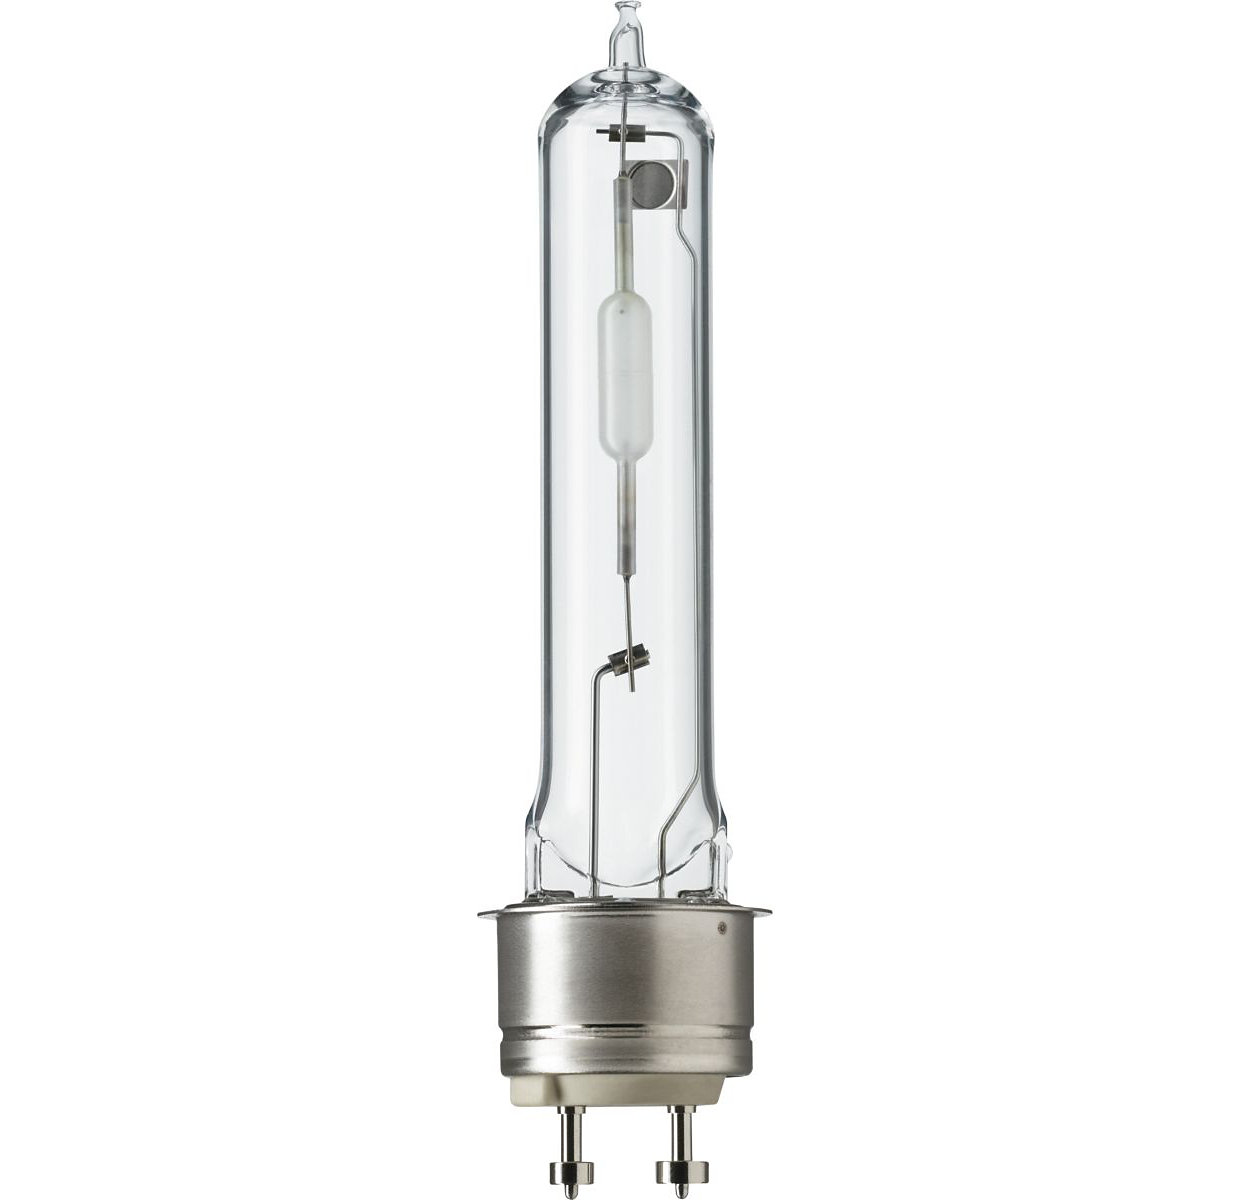 The most energy-efficient reliable white light solution for Outdoor